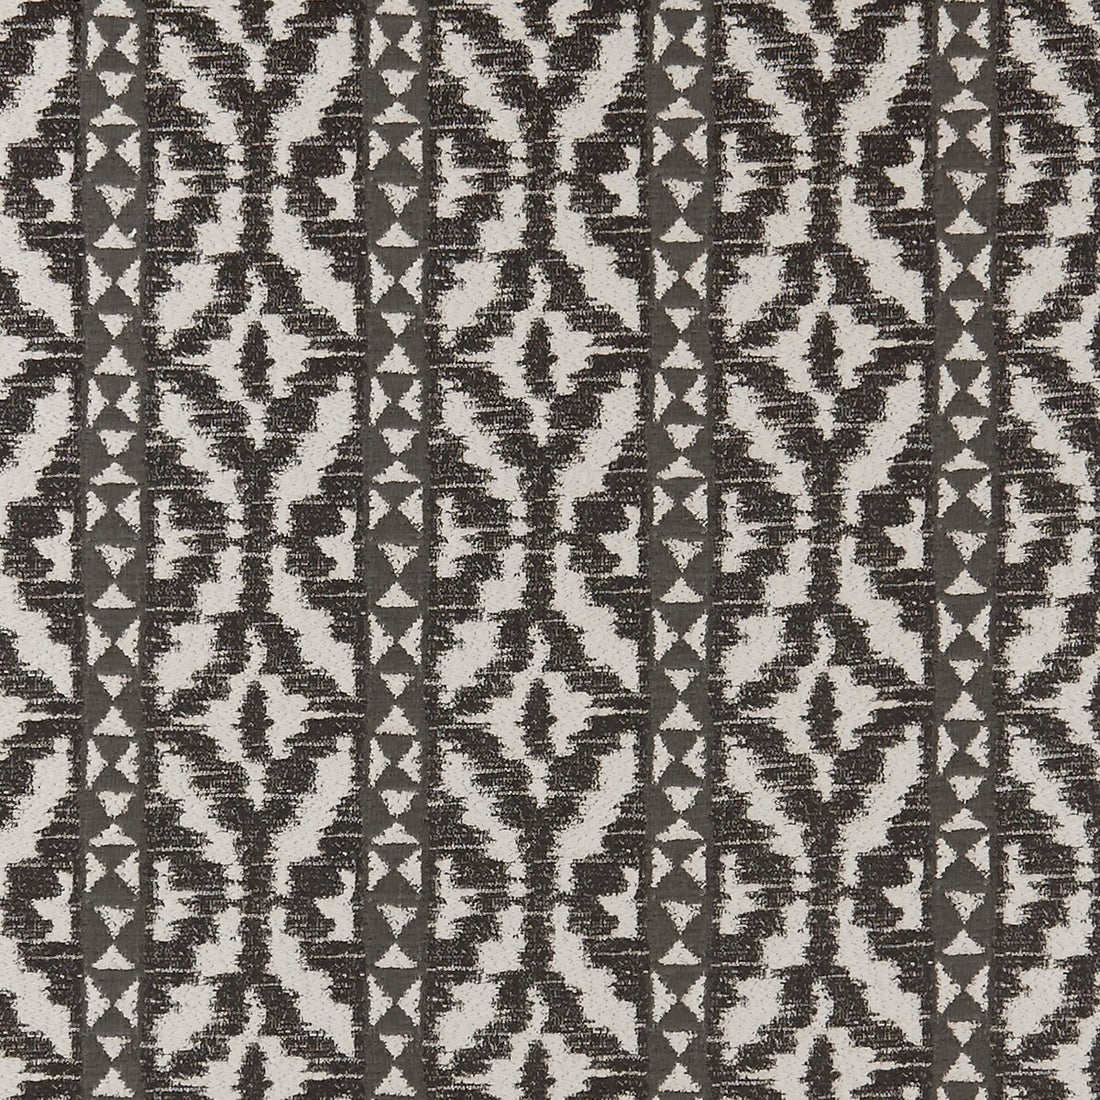 Bw1005 fabric in black/white color - pattern F0877/01.CAC.0 - by Clarke And Clarke in the Clarke &amp; Clarke Black + White collection